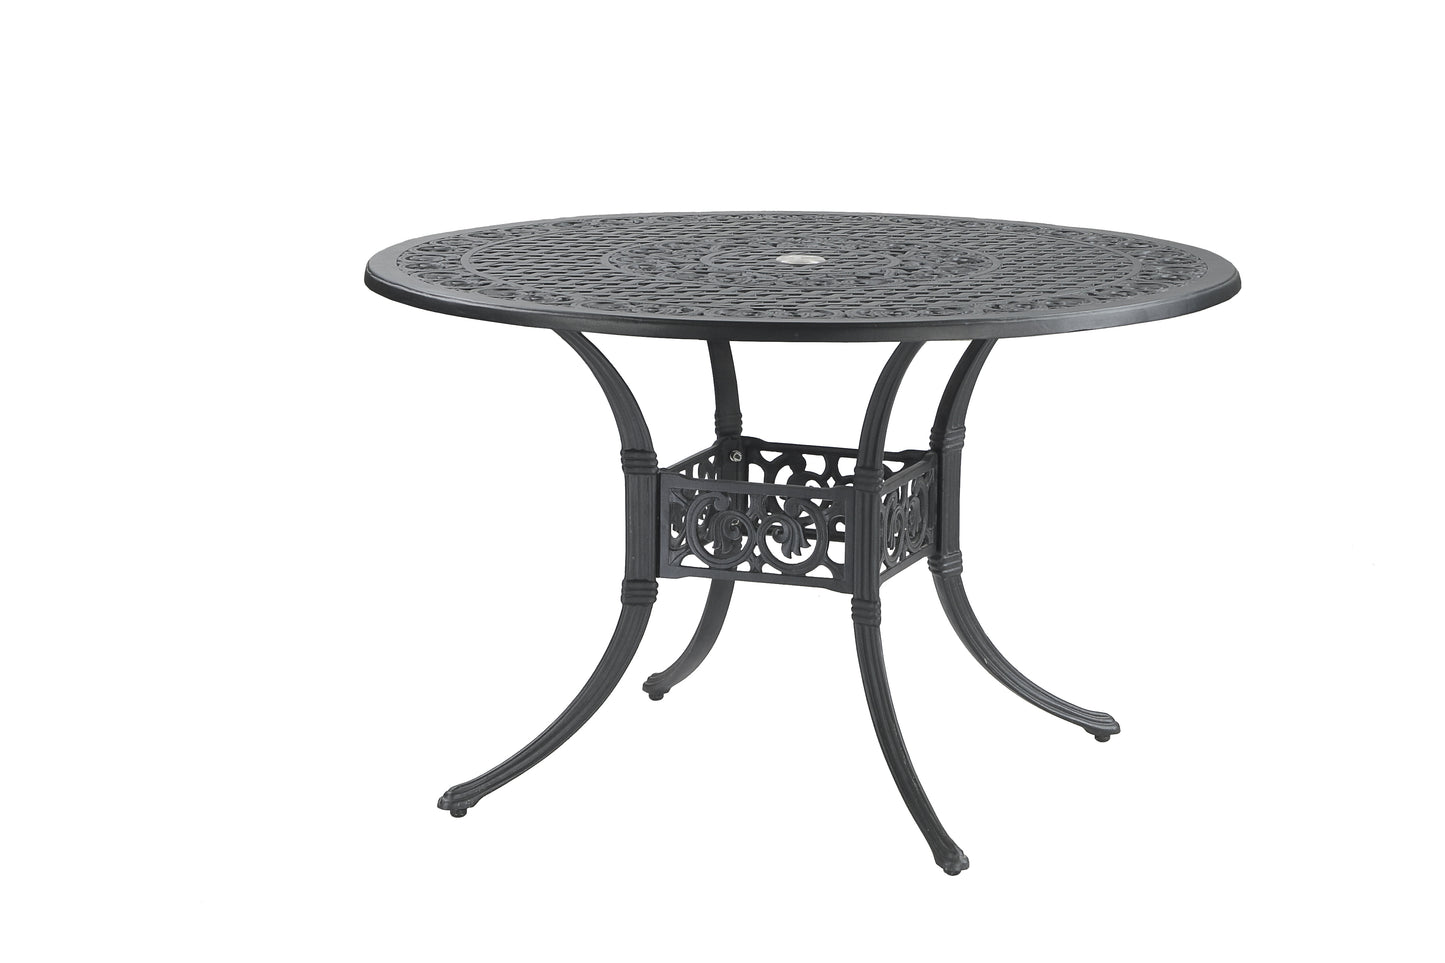 Click to View all Michigan Tables & Accessories